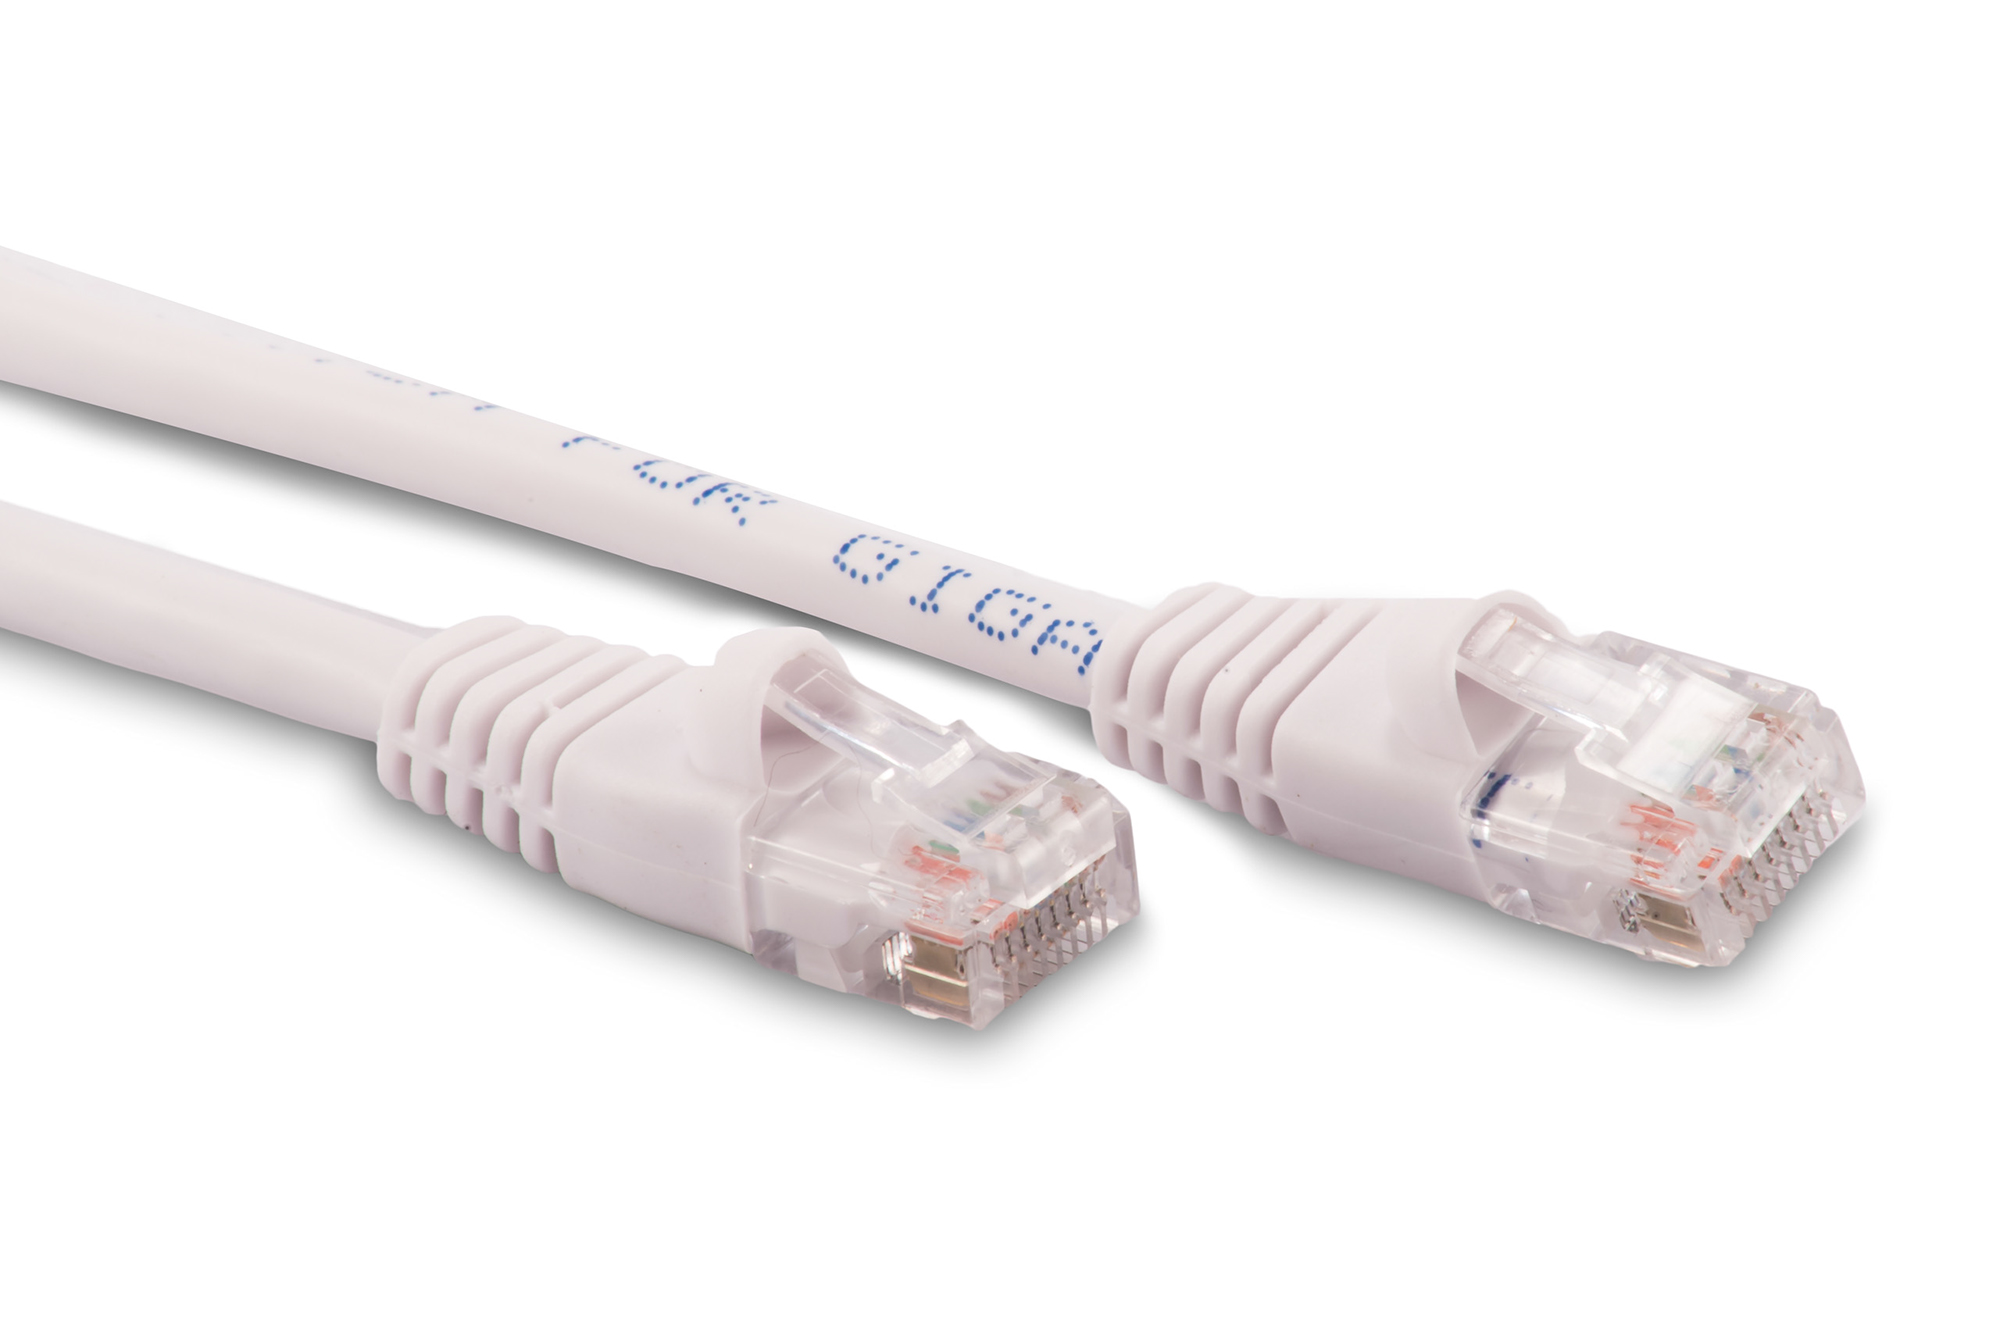 50ft Cat5e Ethernet Patch Cable - White Color - Snagless Boot, Stranded, RJ45, 350Mhz, 24AWG